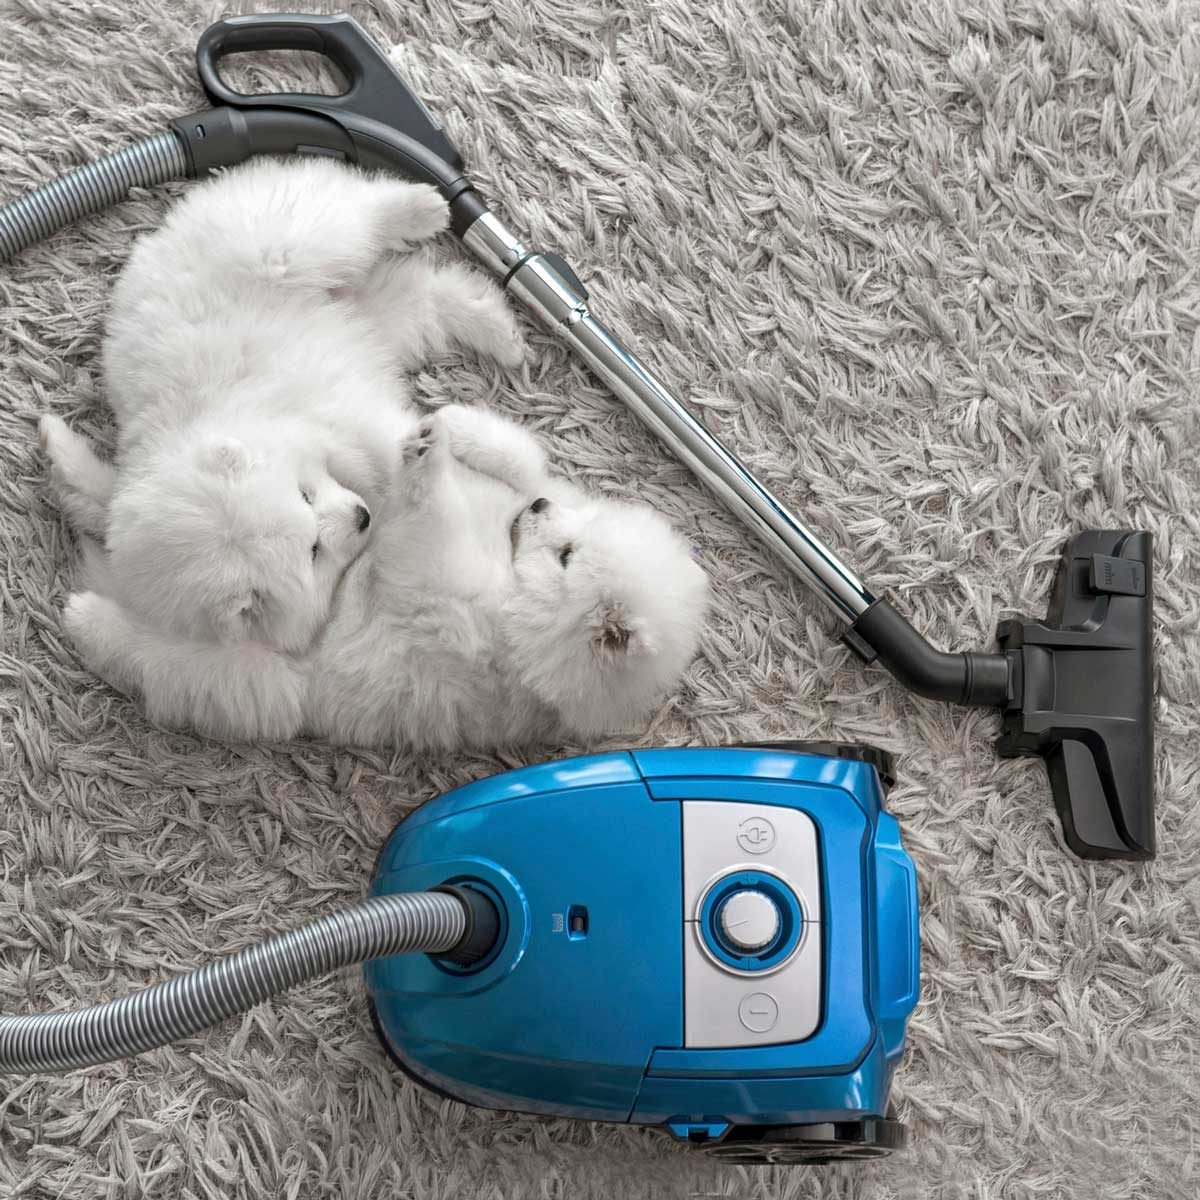 8 Best Vacuum Cleaners for Pet Hair and Stains The Family Handyman